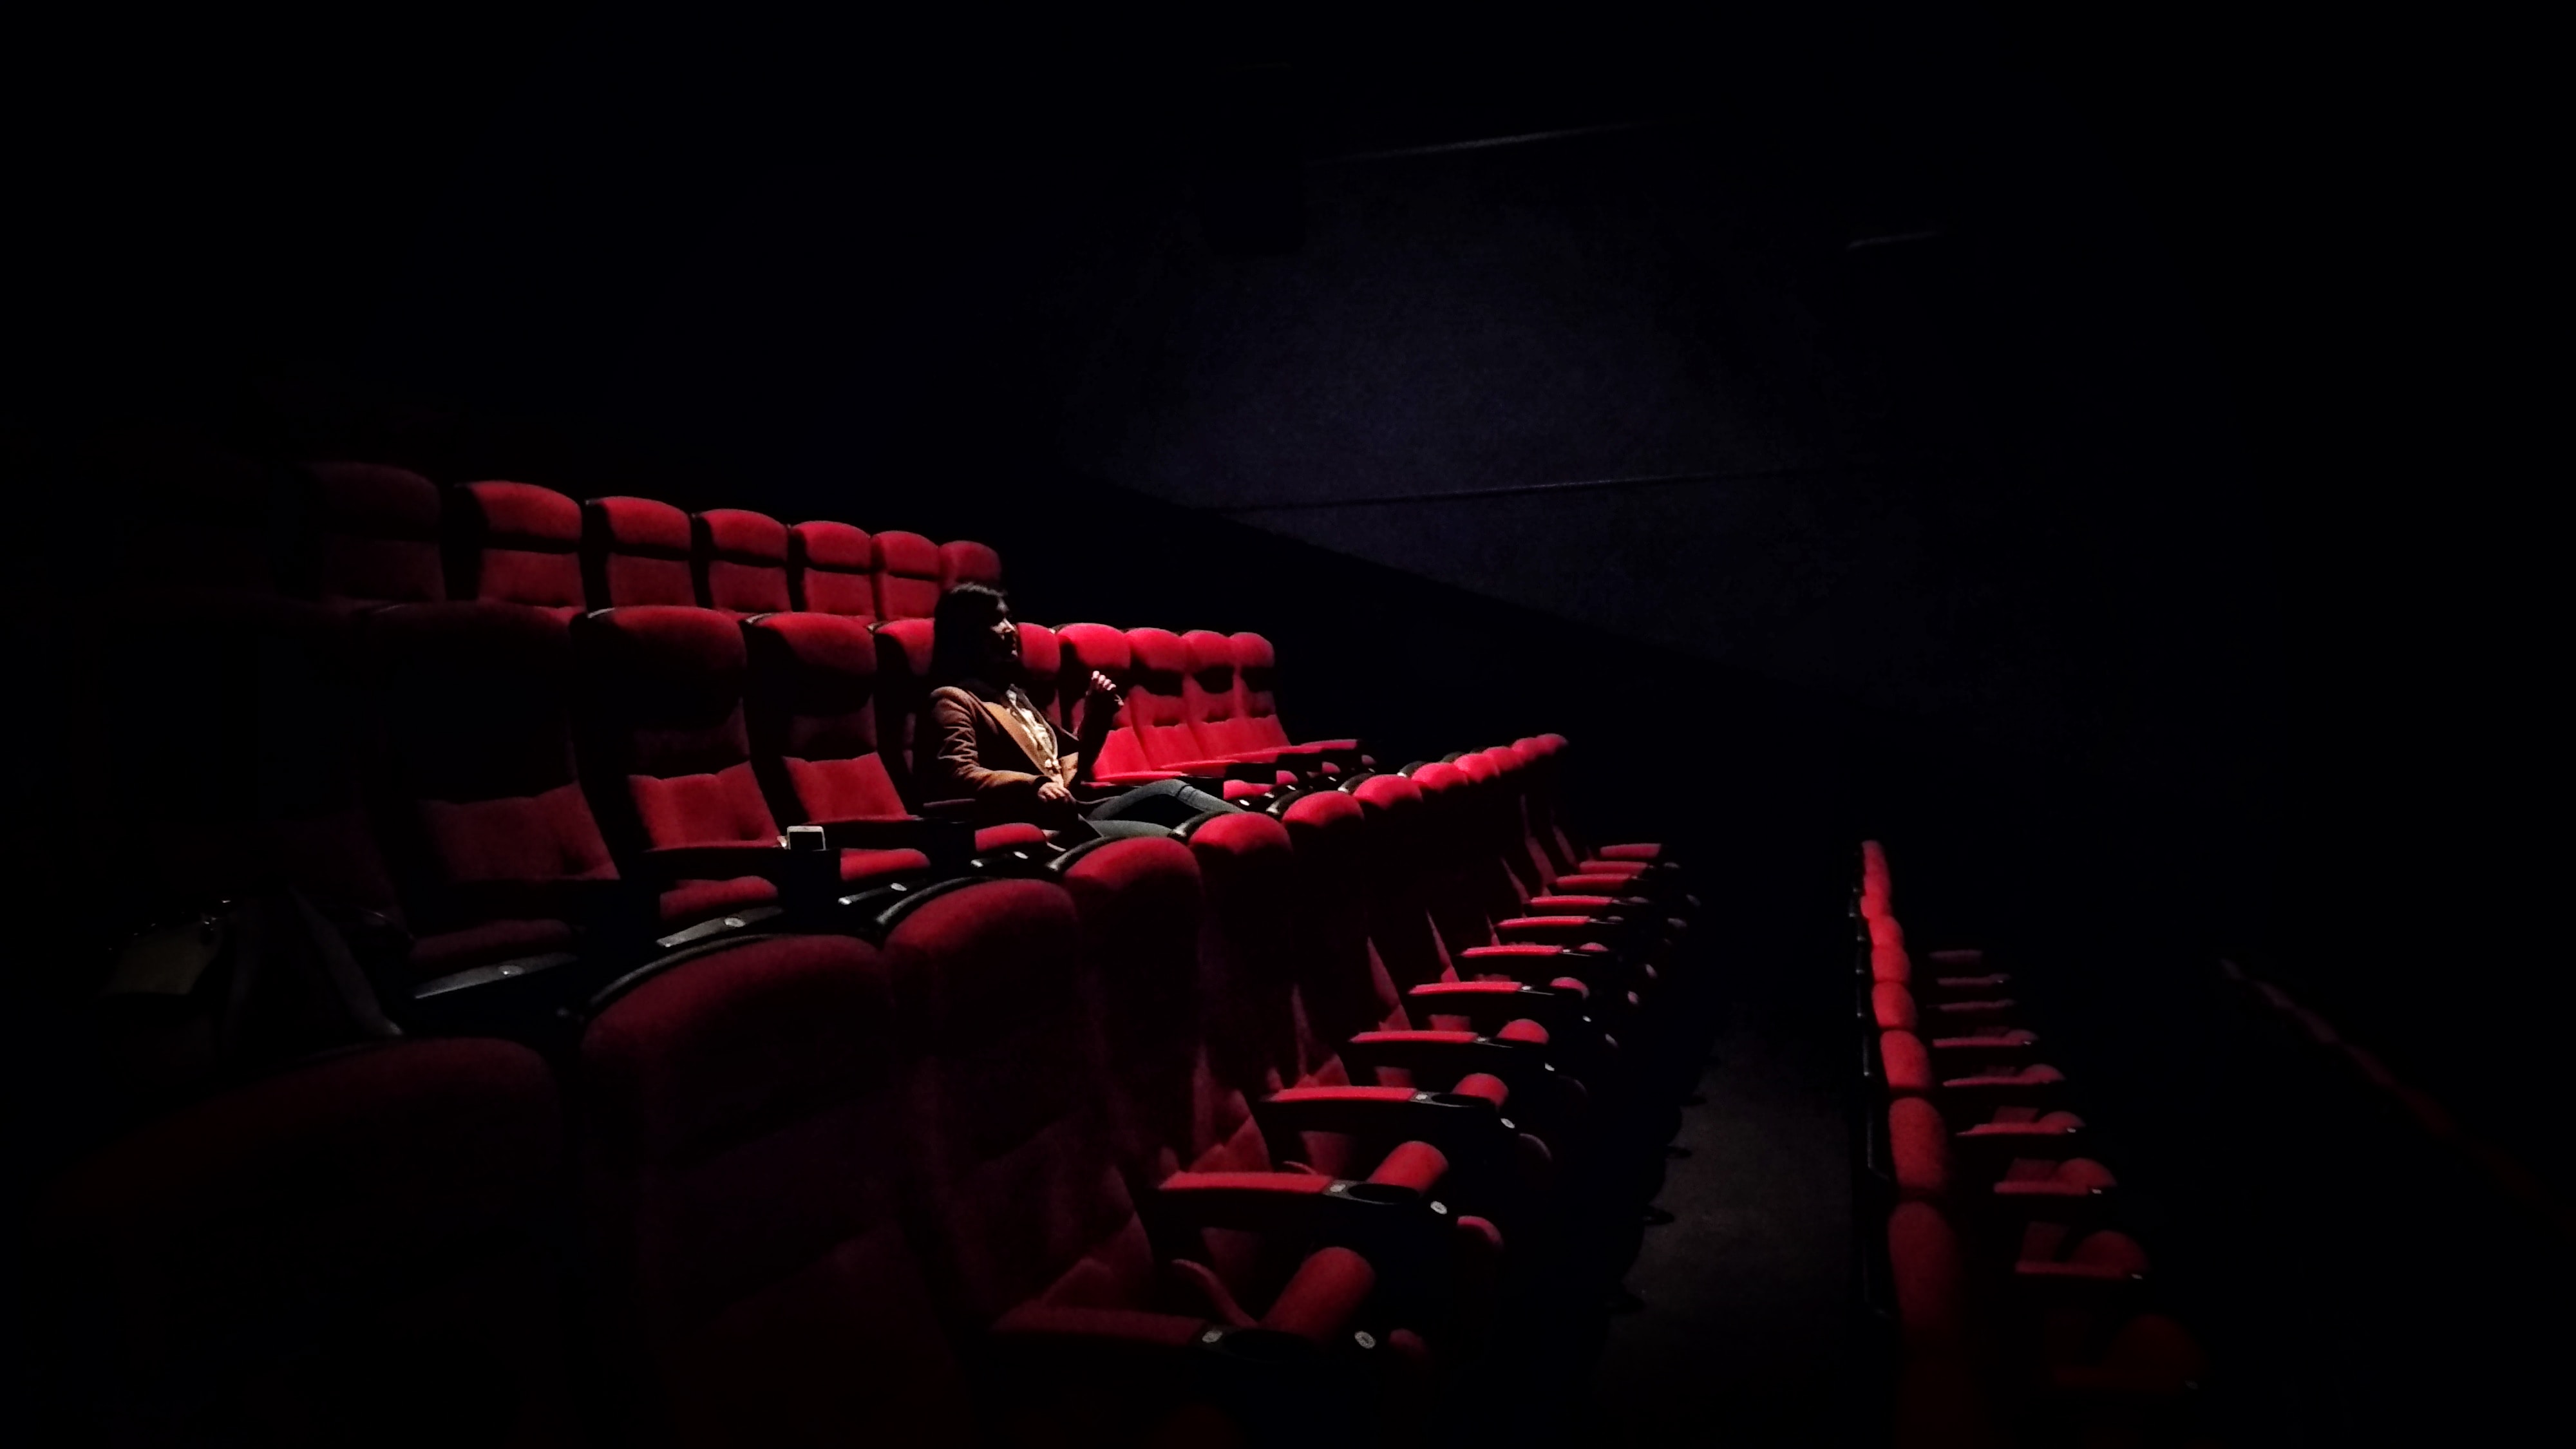 Several rows of theater seats, with only one person sitting in one chair.